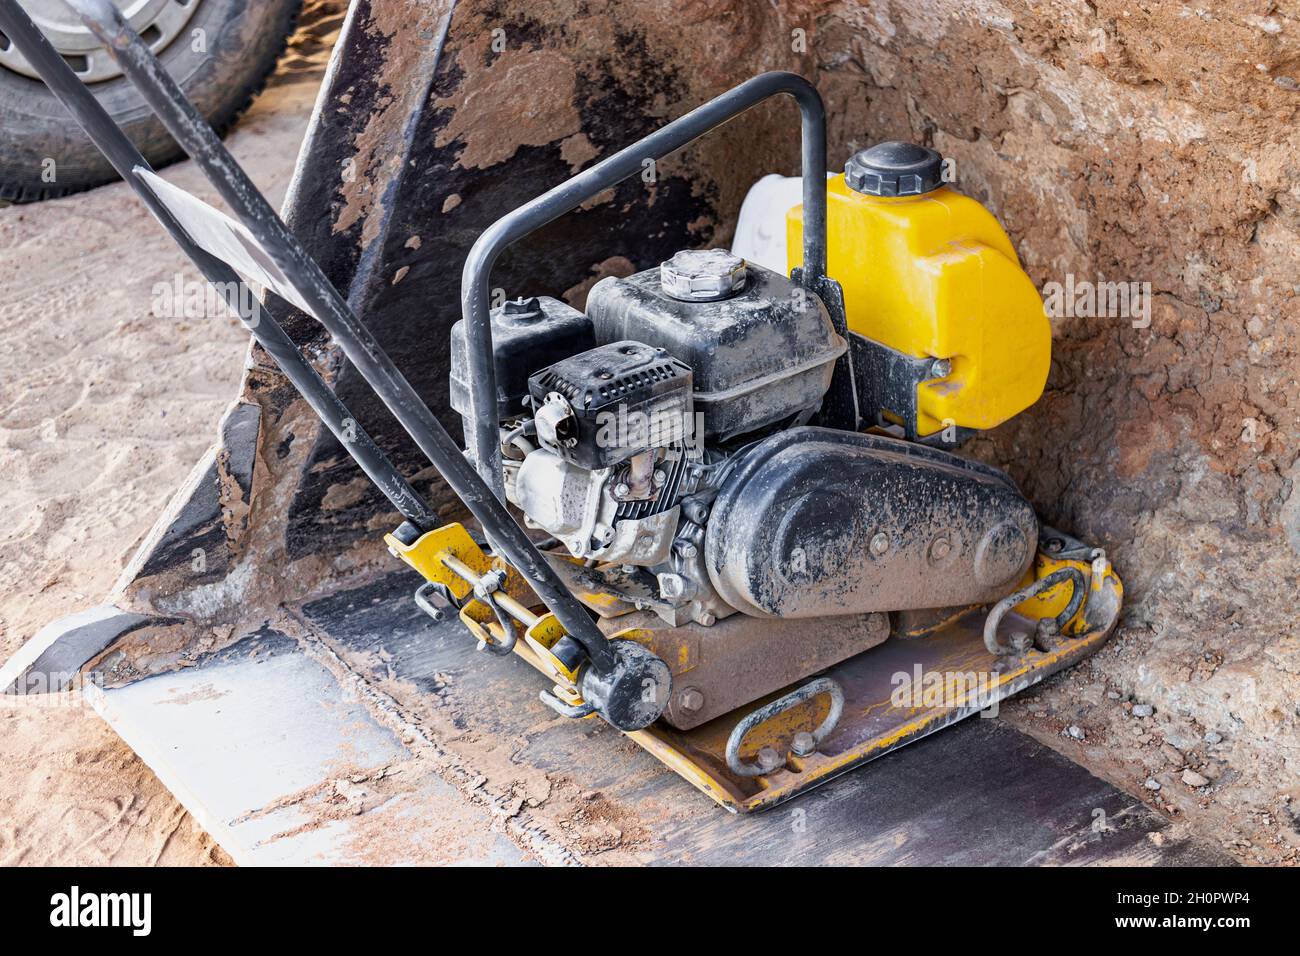 Vibratory rammer with vibrating plate on a construction site. Compaction of  the soil before laying paving slabs. Close-up Stock Photo - Alamy